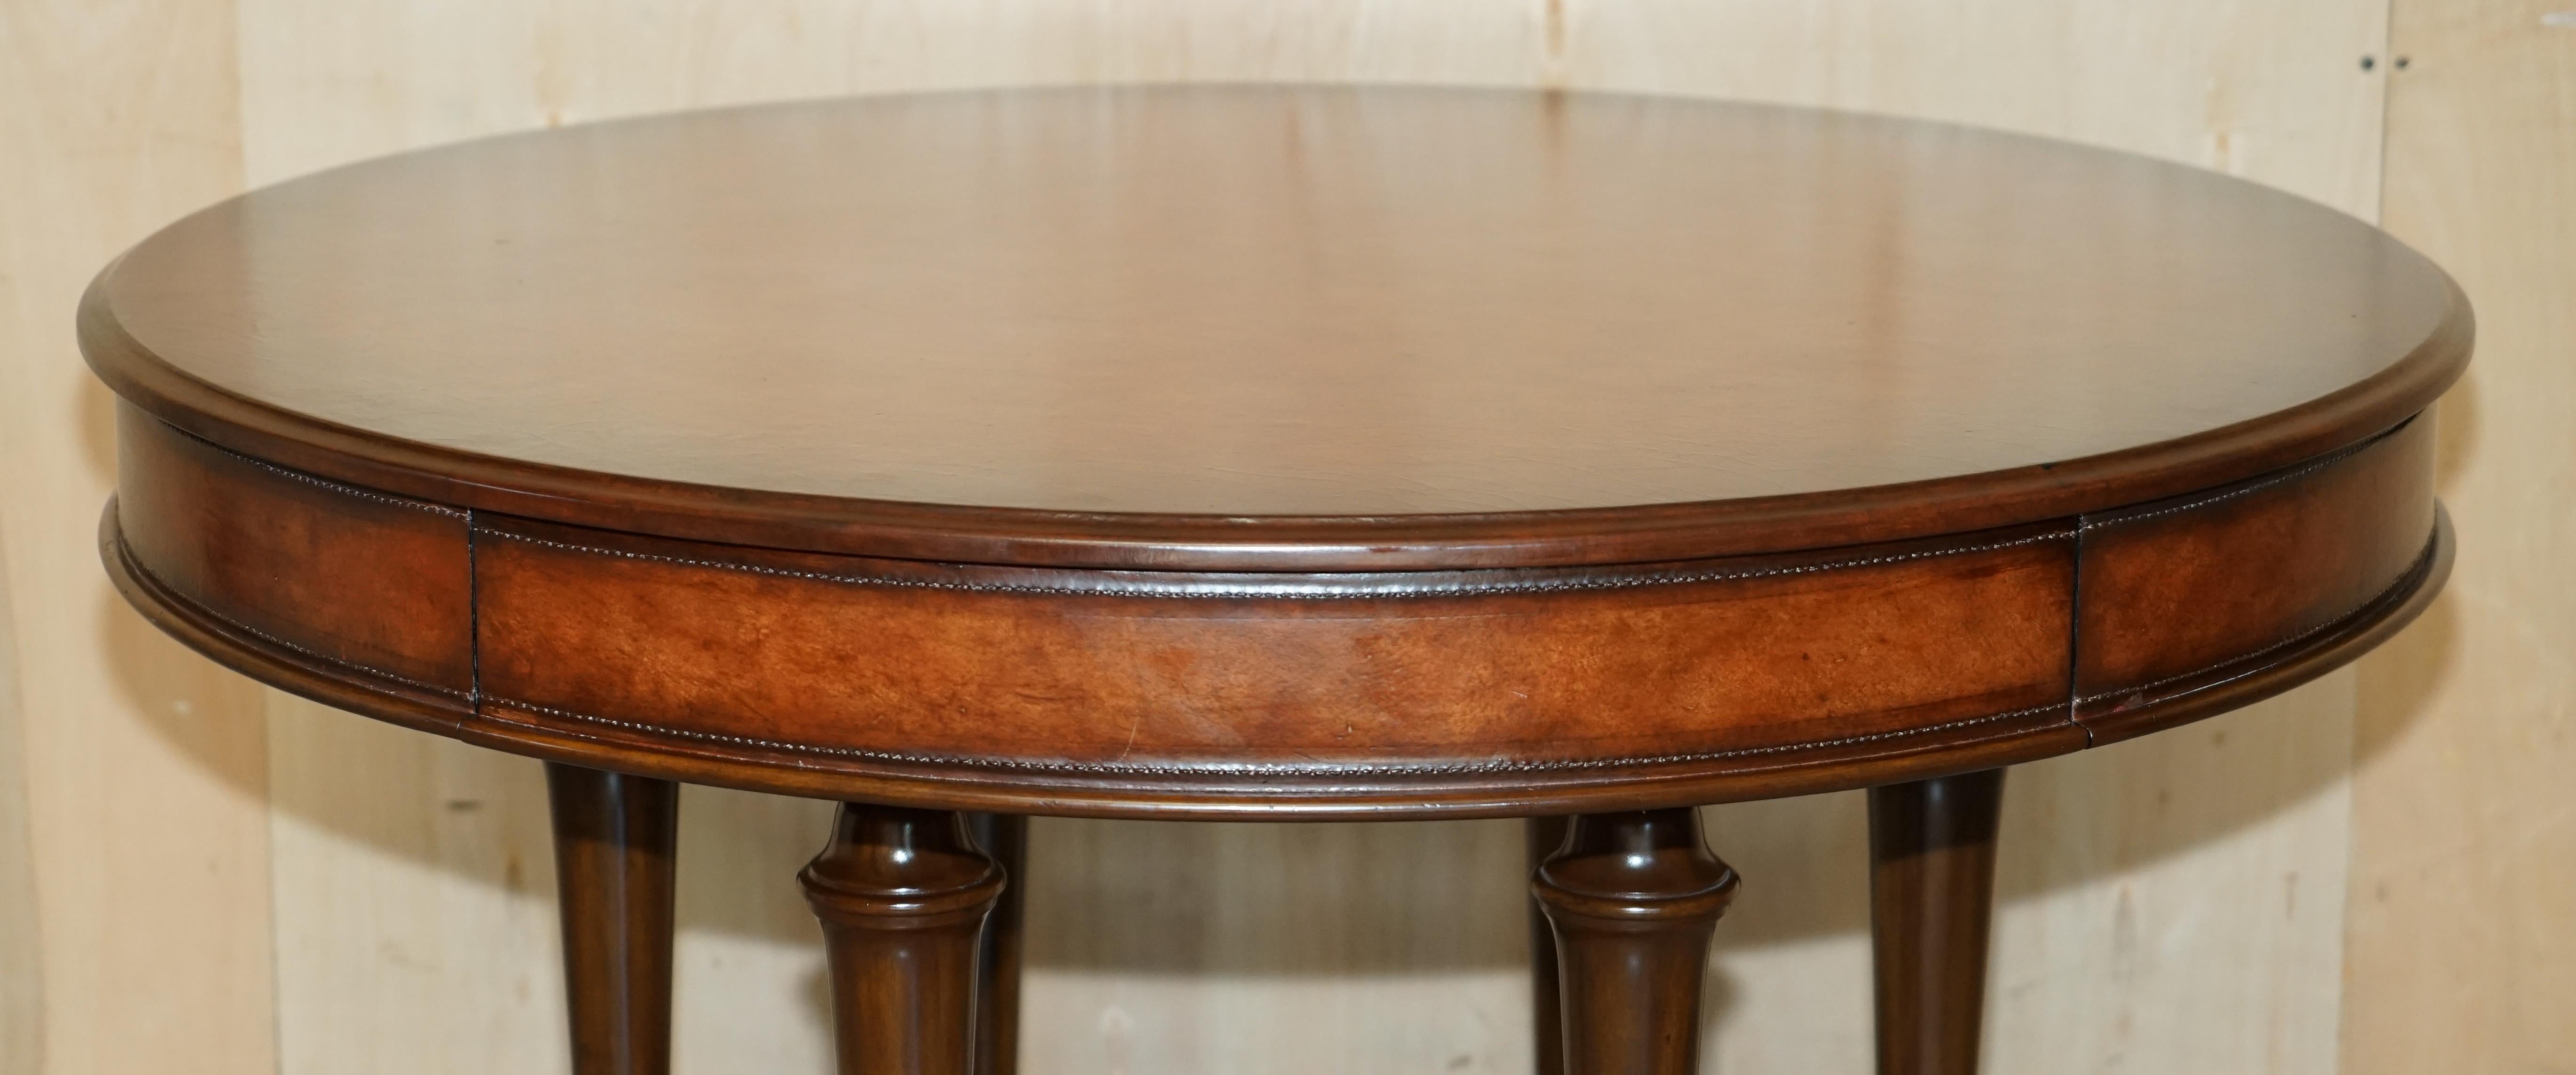 Hand-Crafted 1 of 2 Ralph Lauren Centre Occasional Centre Tables in Brown Leather For Sale